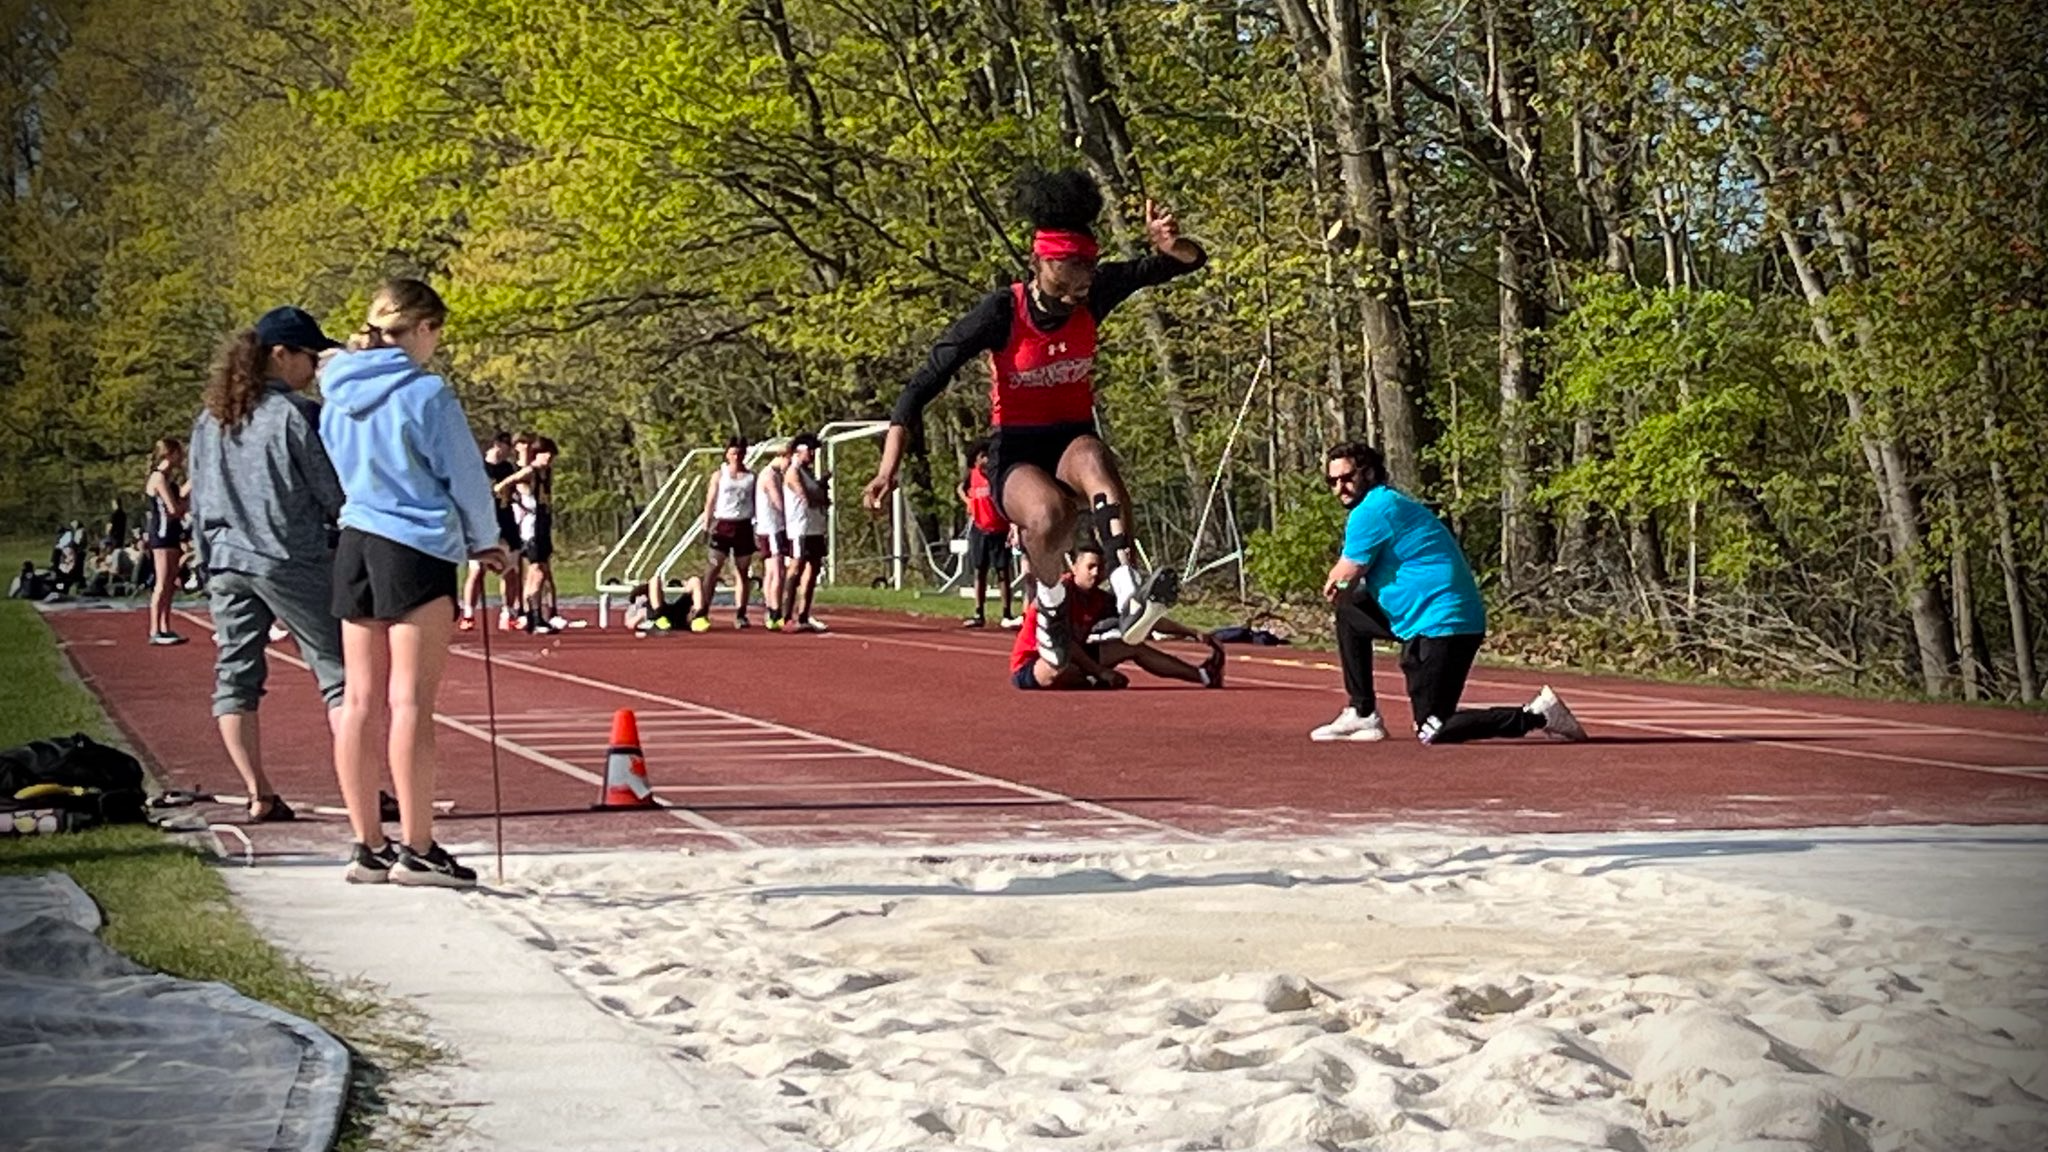 Long Jump athlete in mid air